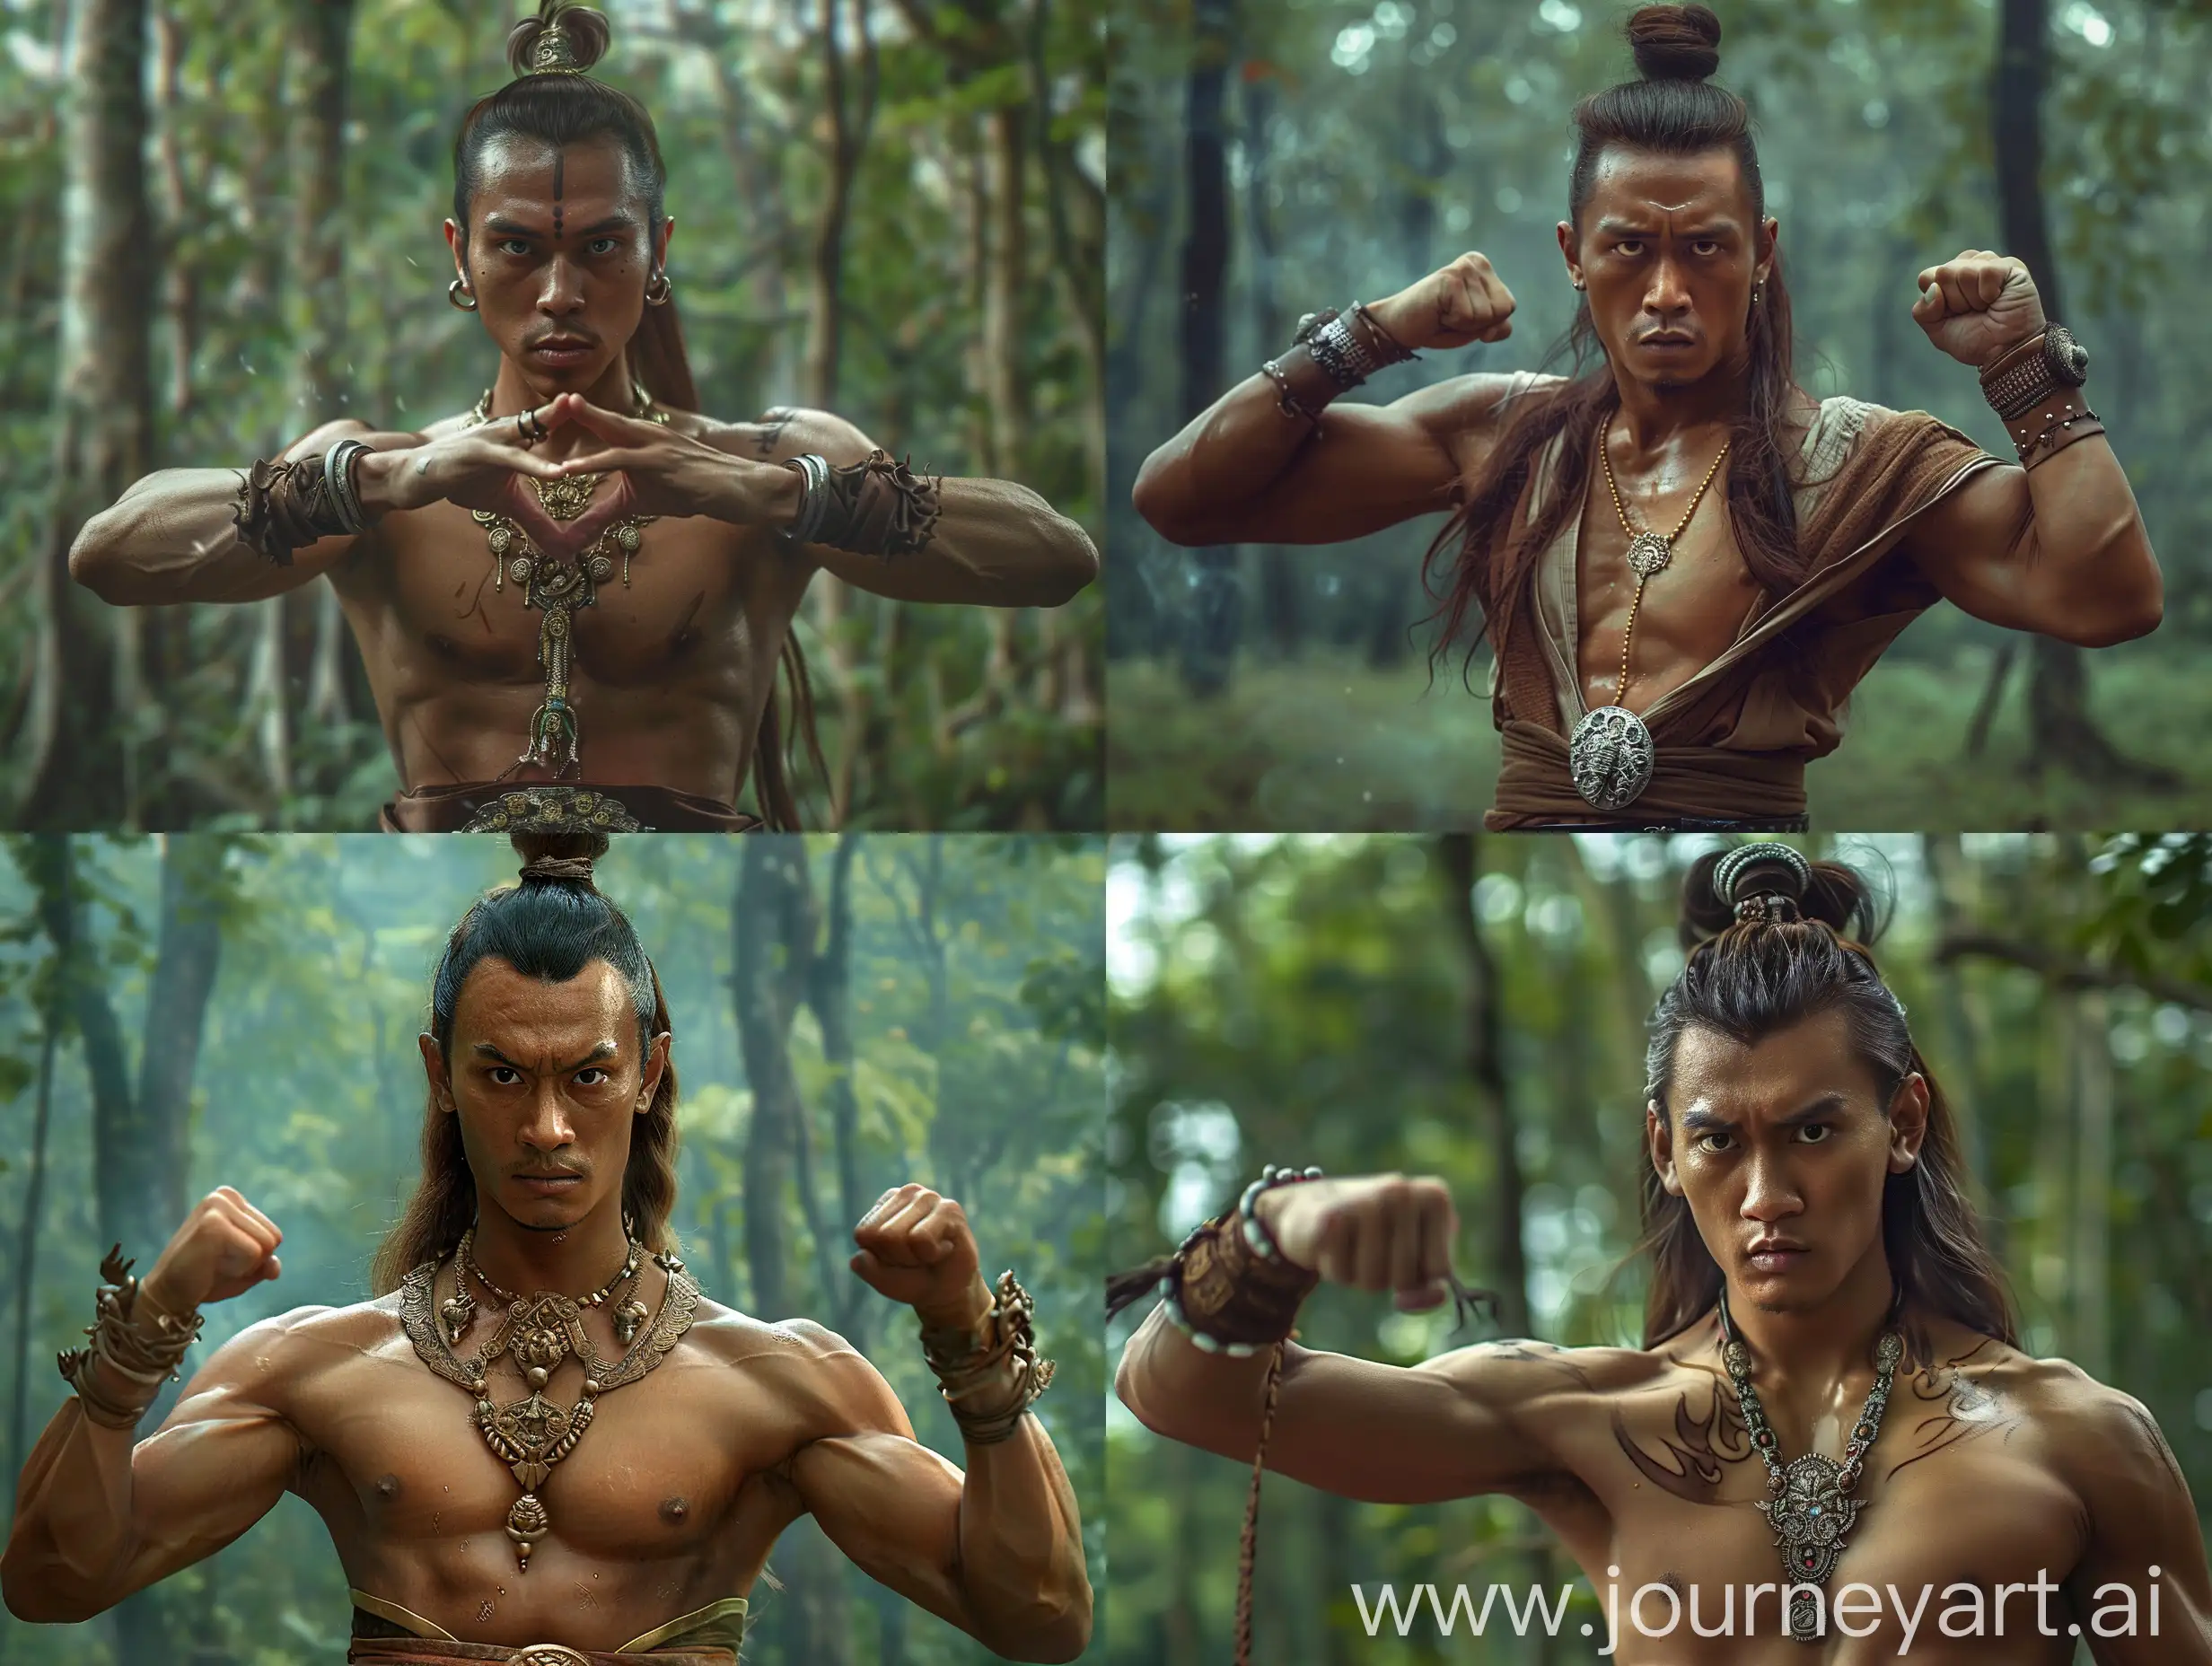 Indonesian-Man-Practicing-Majapahit-Style-Martial-Arts-in-Forest-Setting